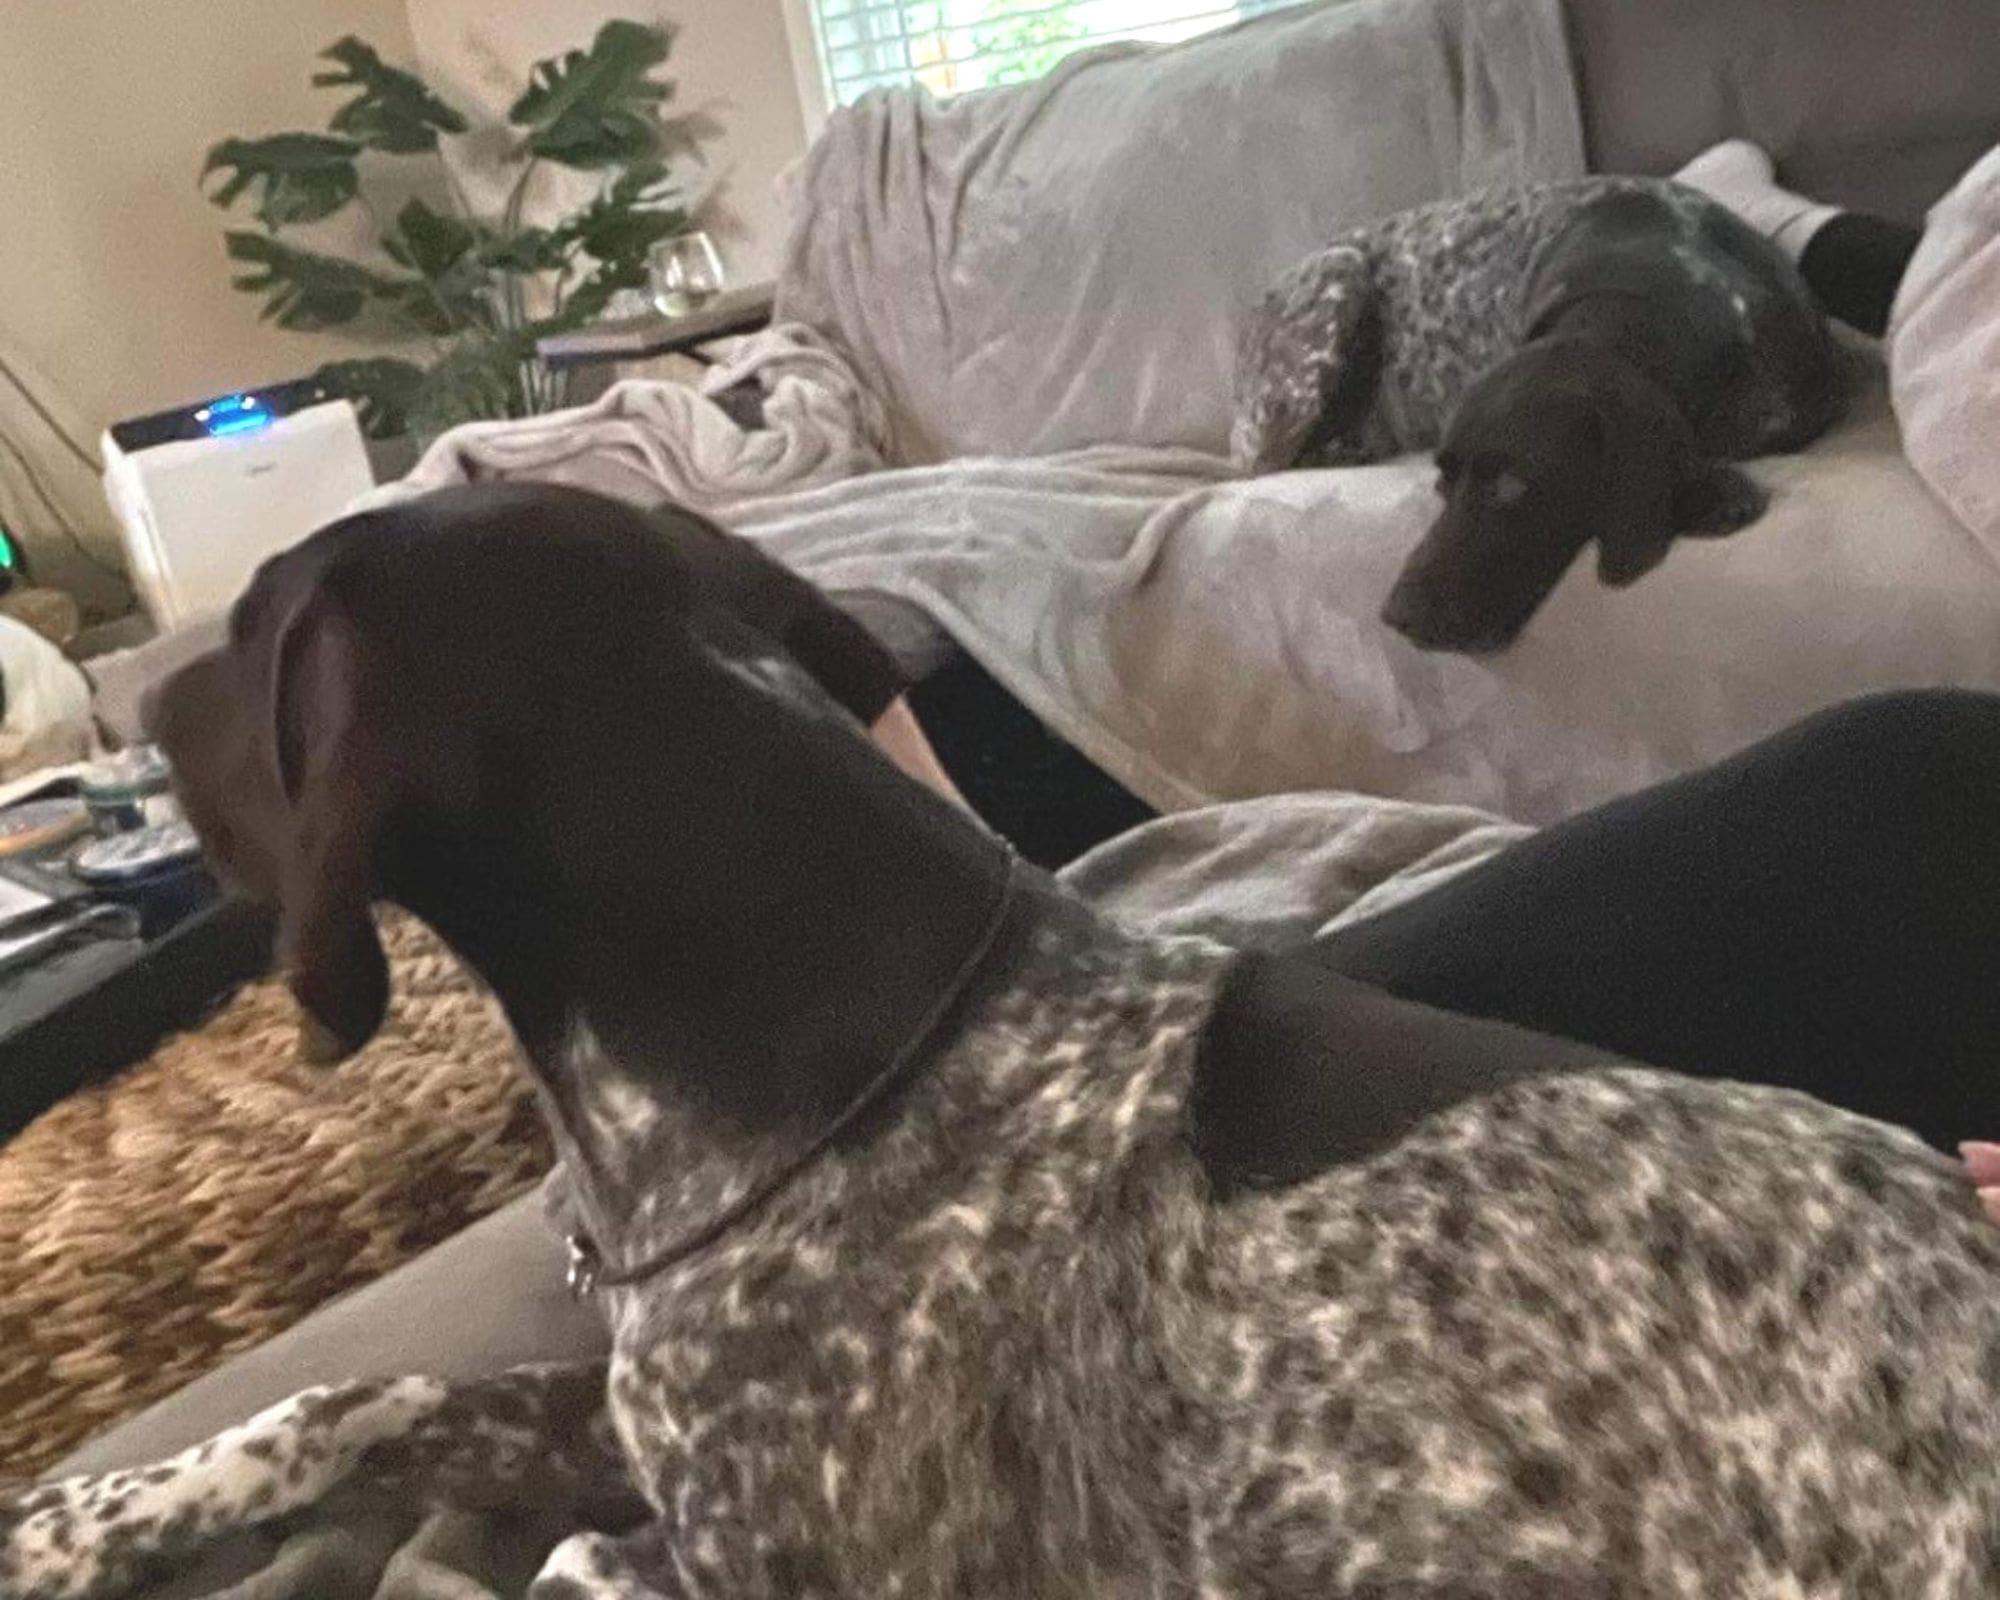 "They are currently enjoying some time on the couch watching some TV before our travel!" co-owner Carley Simpson wrote in late Wednesday night, referring to Jade (center, always)  and her half-brother Jasper (right). Both dogs are CJ offspring.